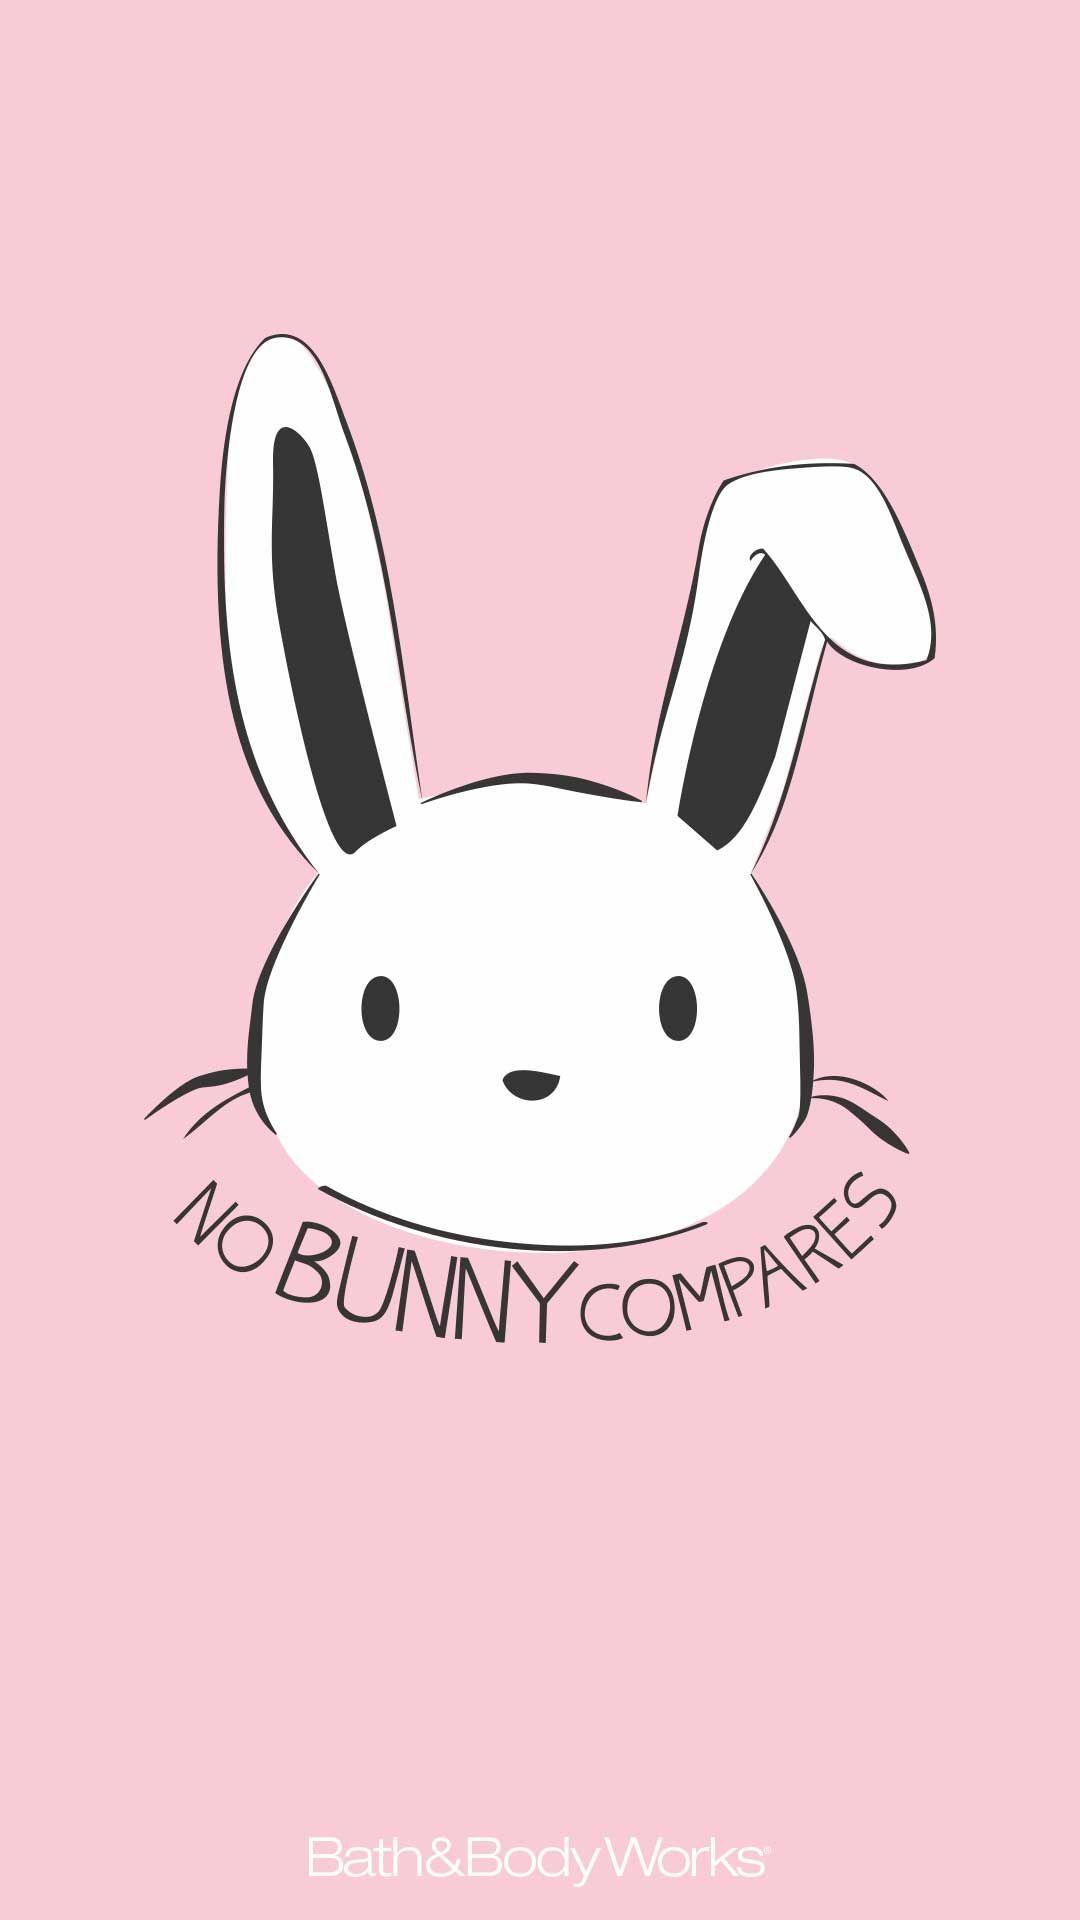 No Bunny Compares Easter iPhone Wallpaper. Bunny wallpaper, Easter wallpaper, Rabbit wallpaper